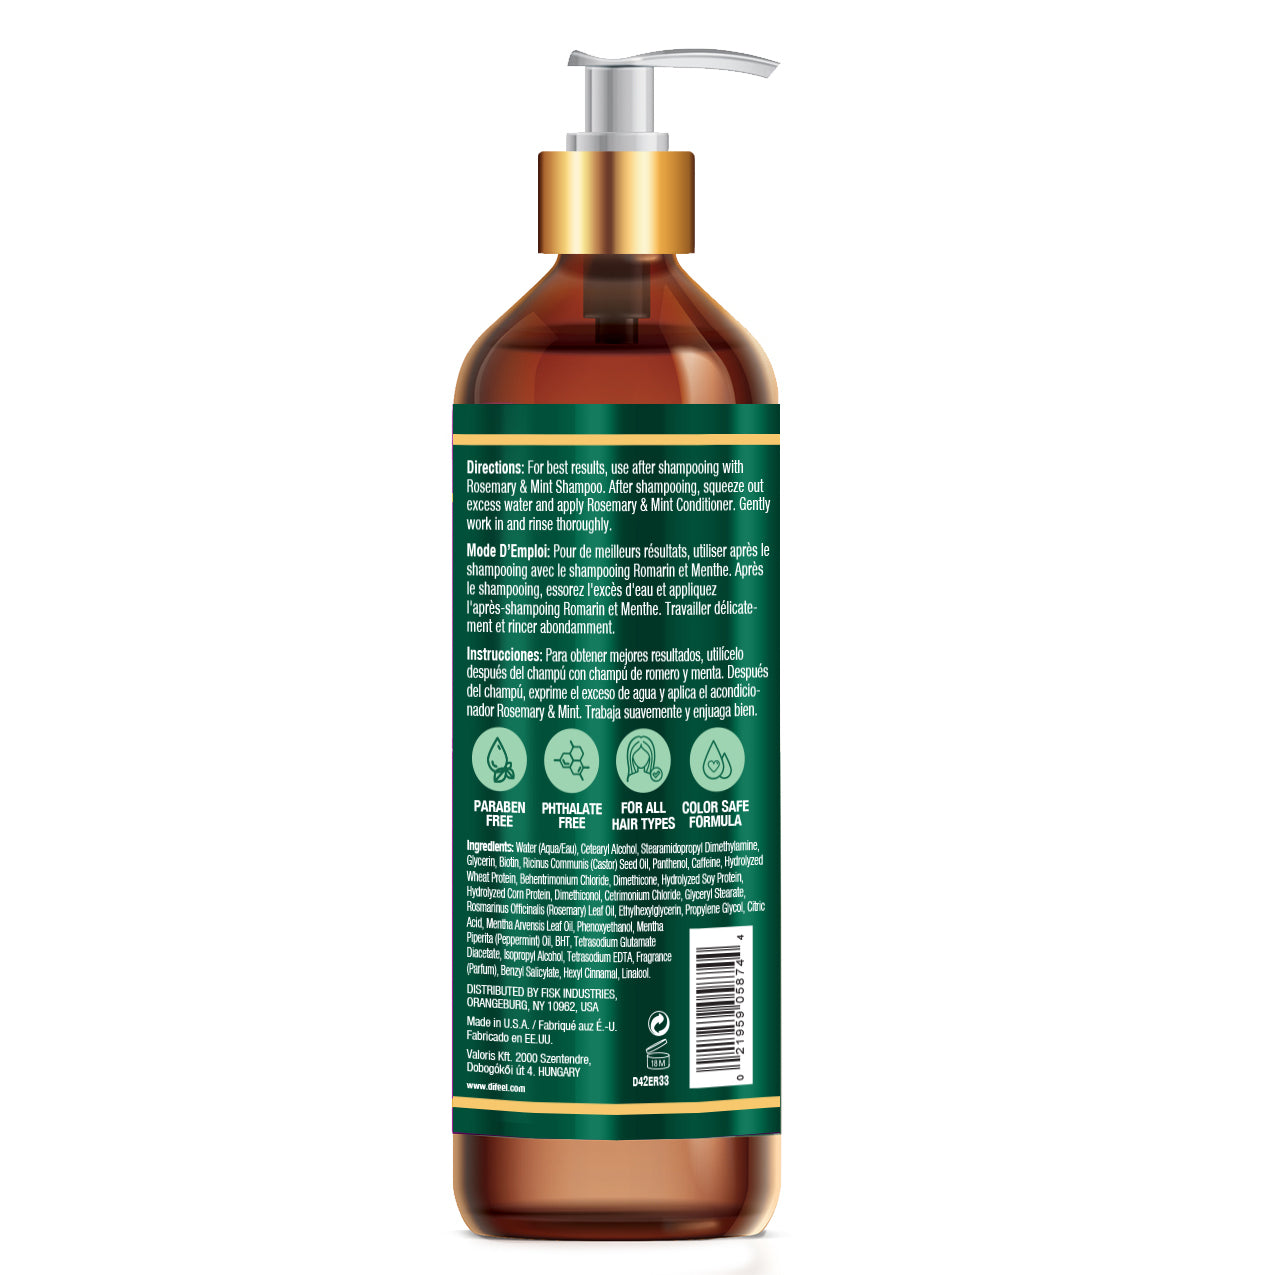 Difeel Elevated Rosemary and Mint Conditioner 33.8 oz.